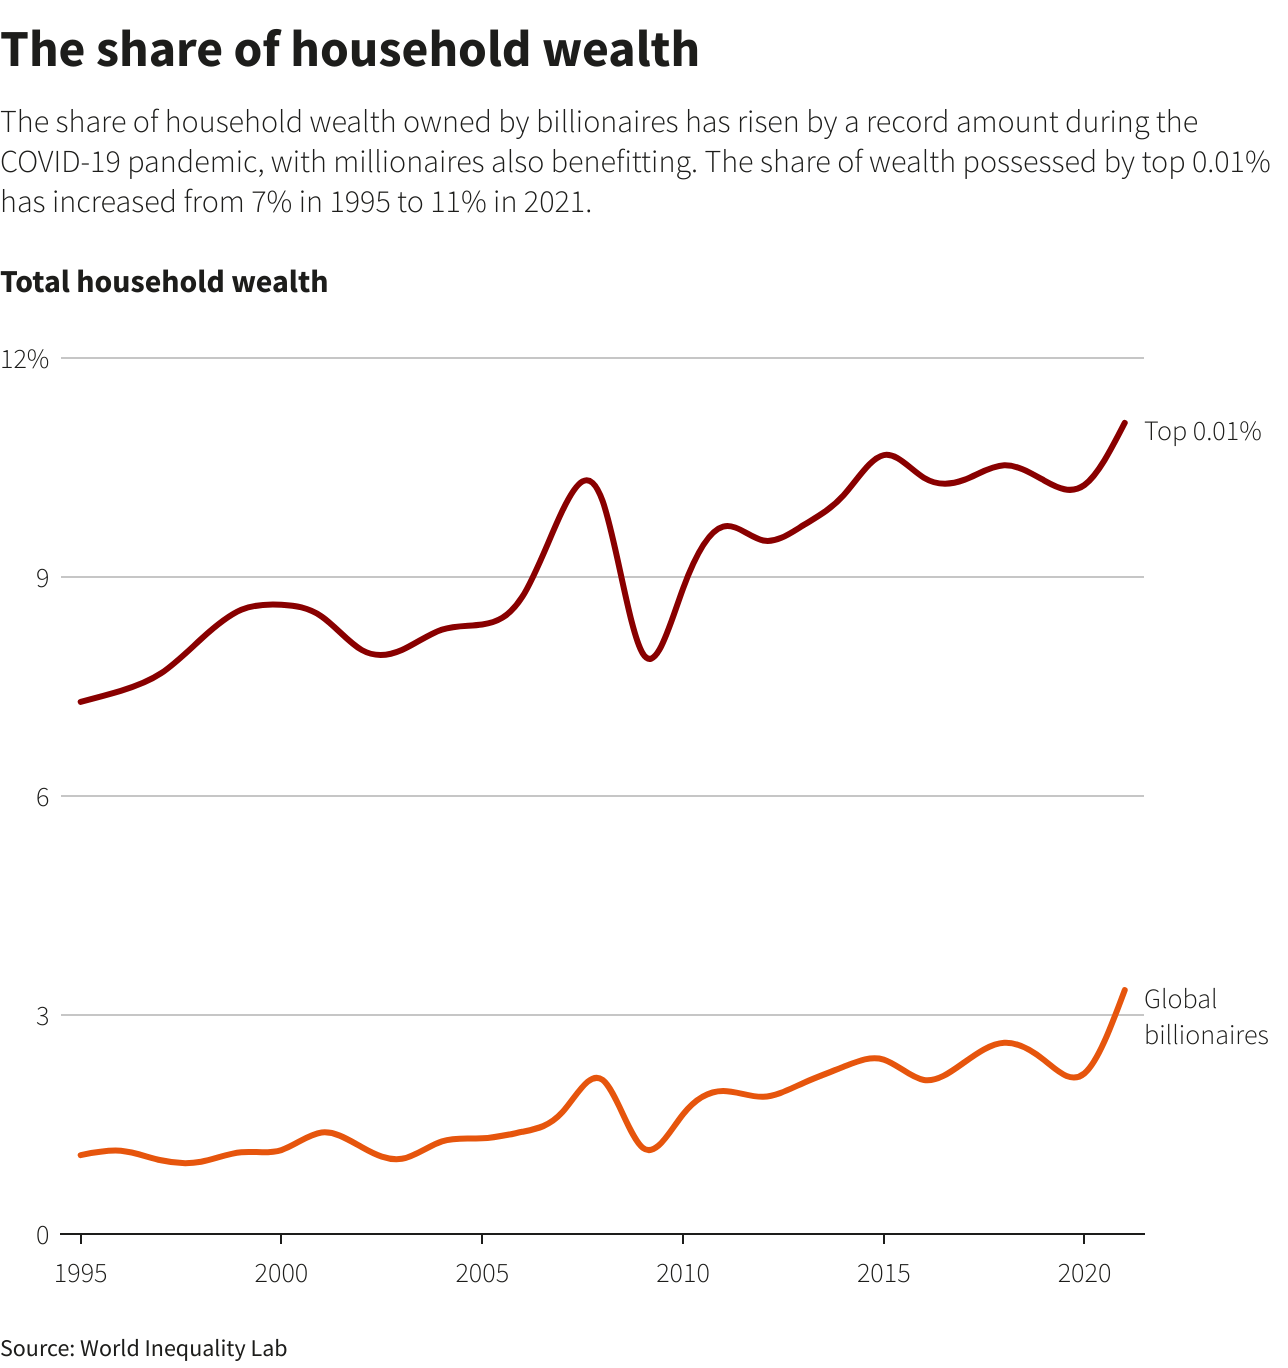 The share of household wealth by billionaires